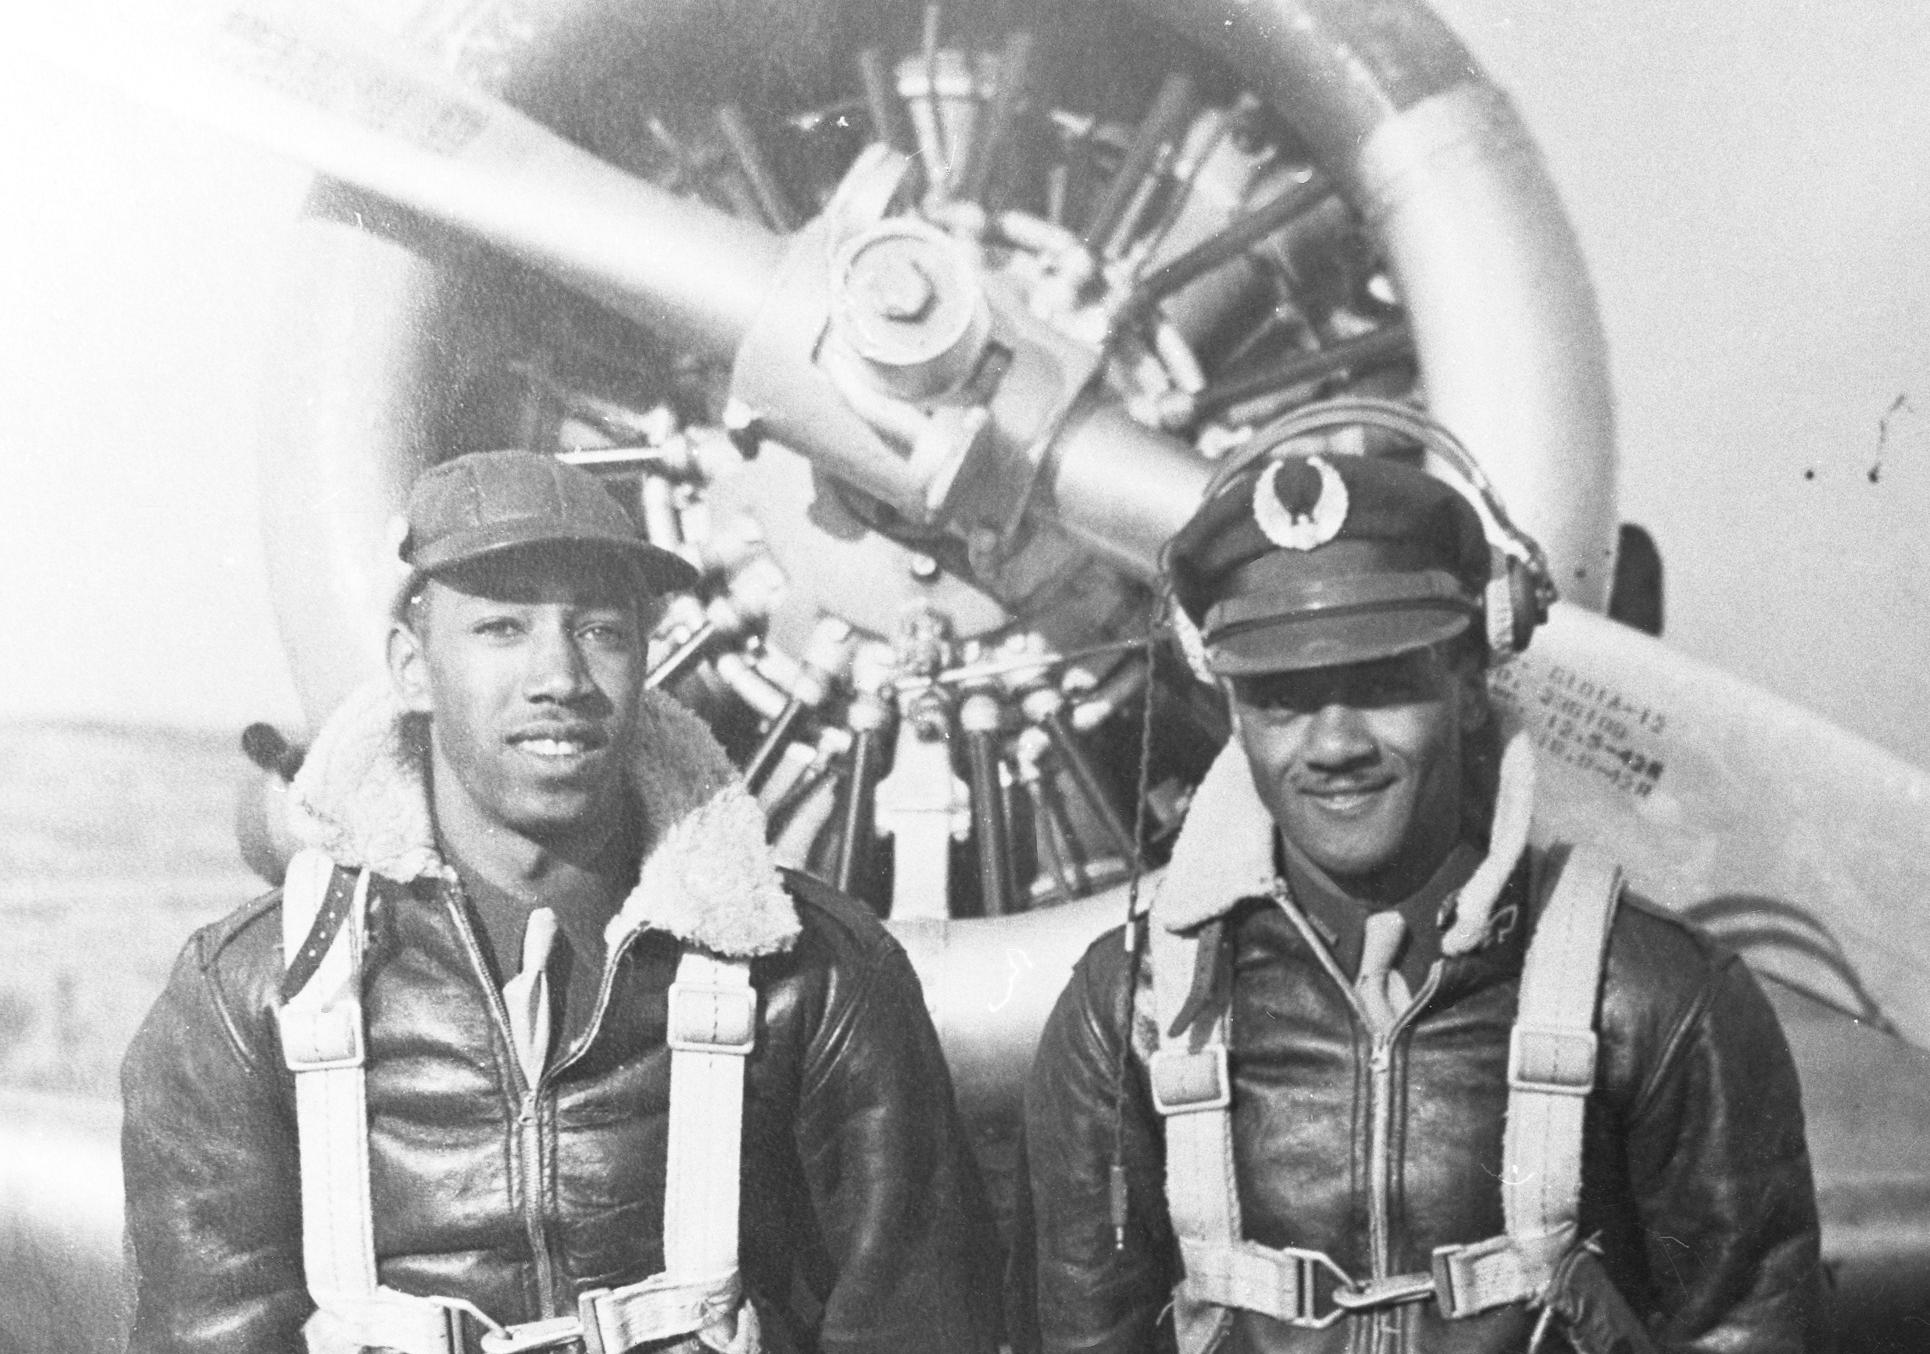 Black and white photo with two African American men wearing bomber jackets and harnesses standing in front of a propeller plane